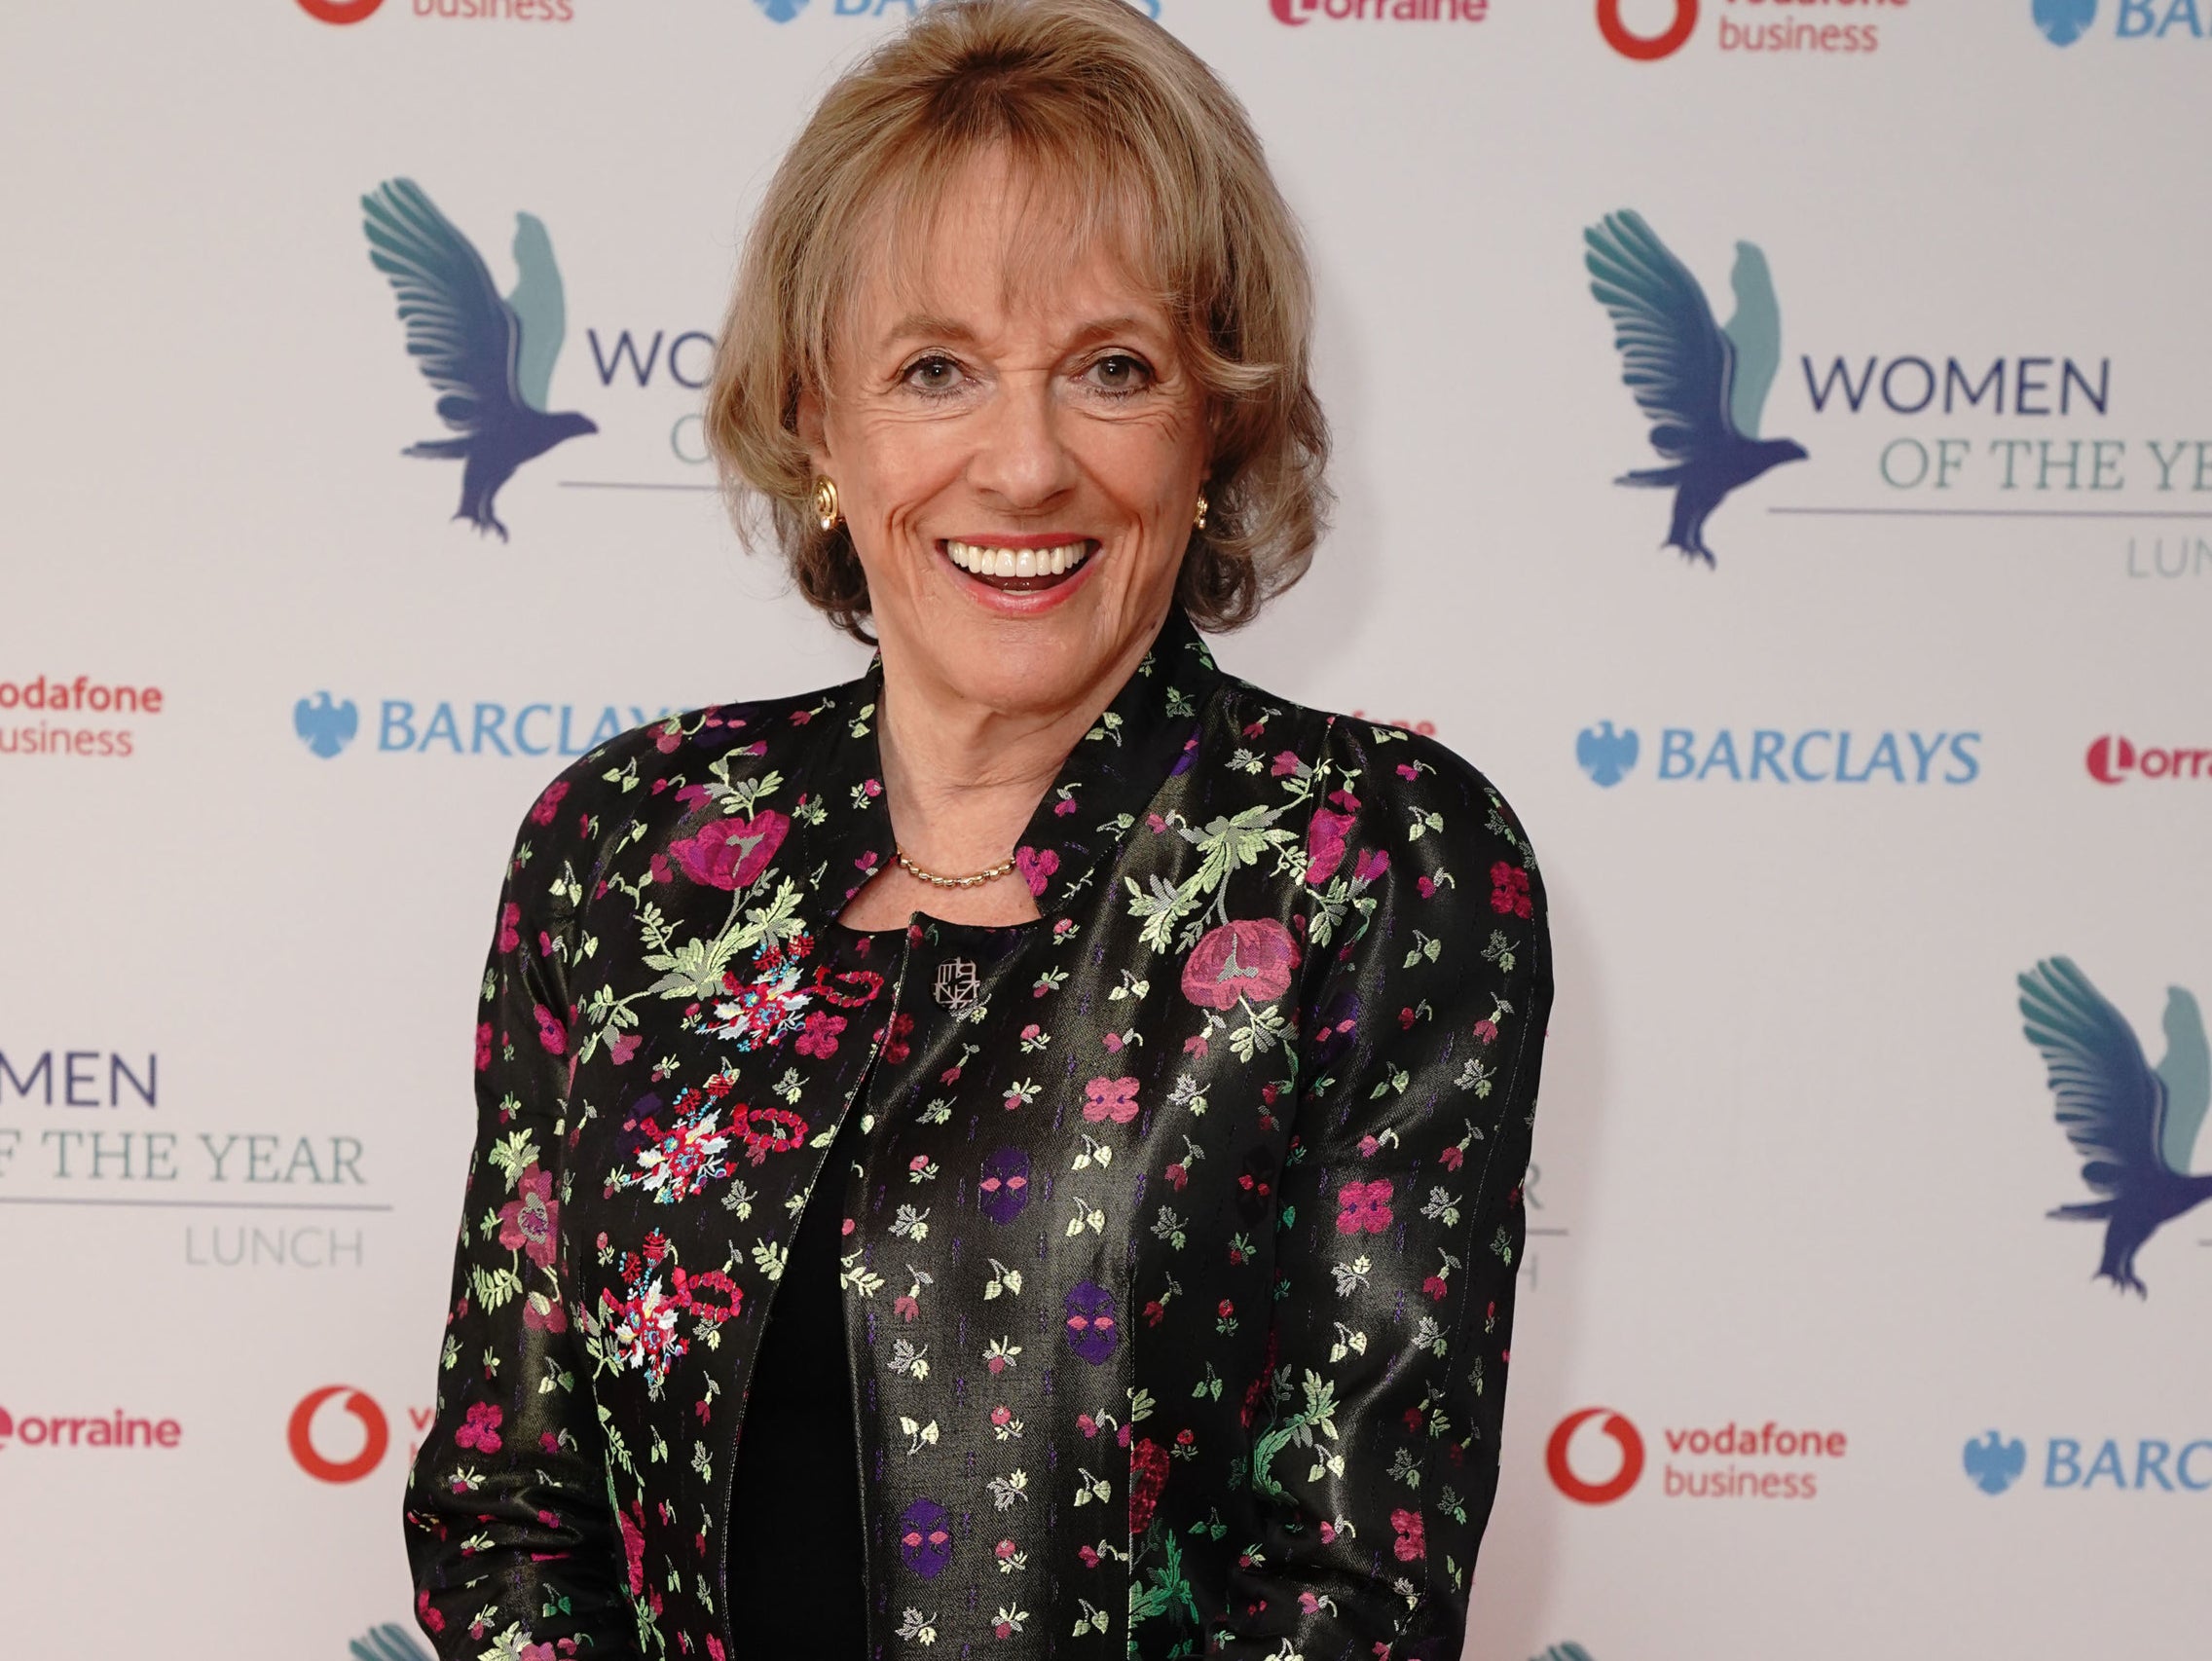 Esther Rantzen has revealed she is considering assisted dying in Switzerland